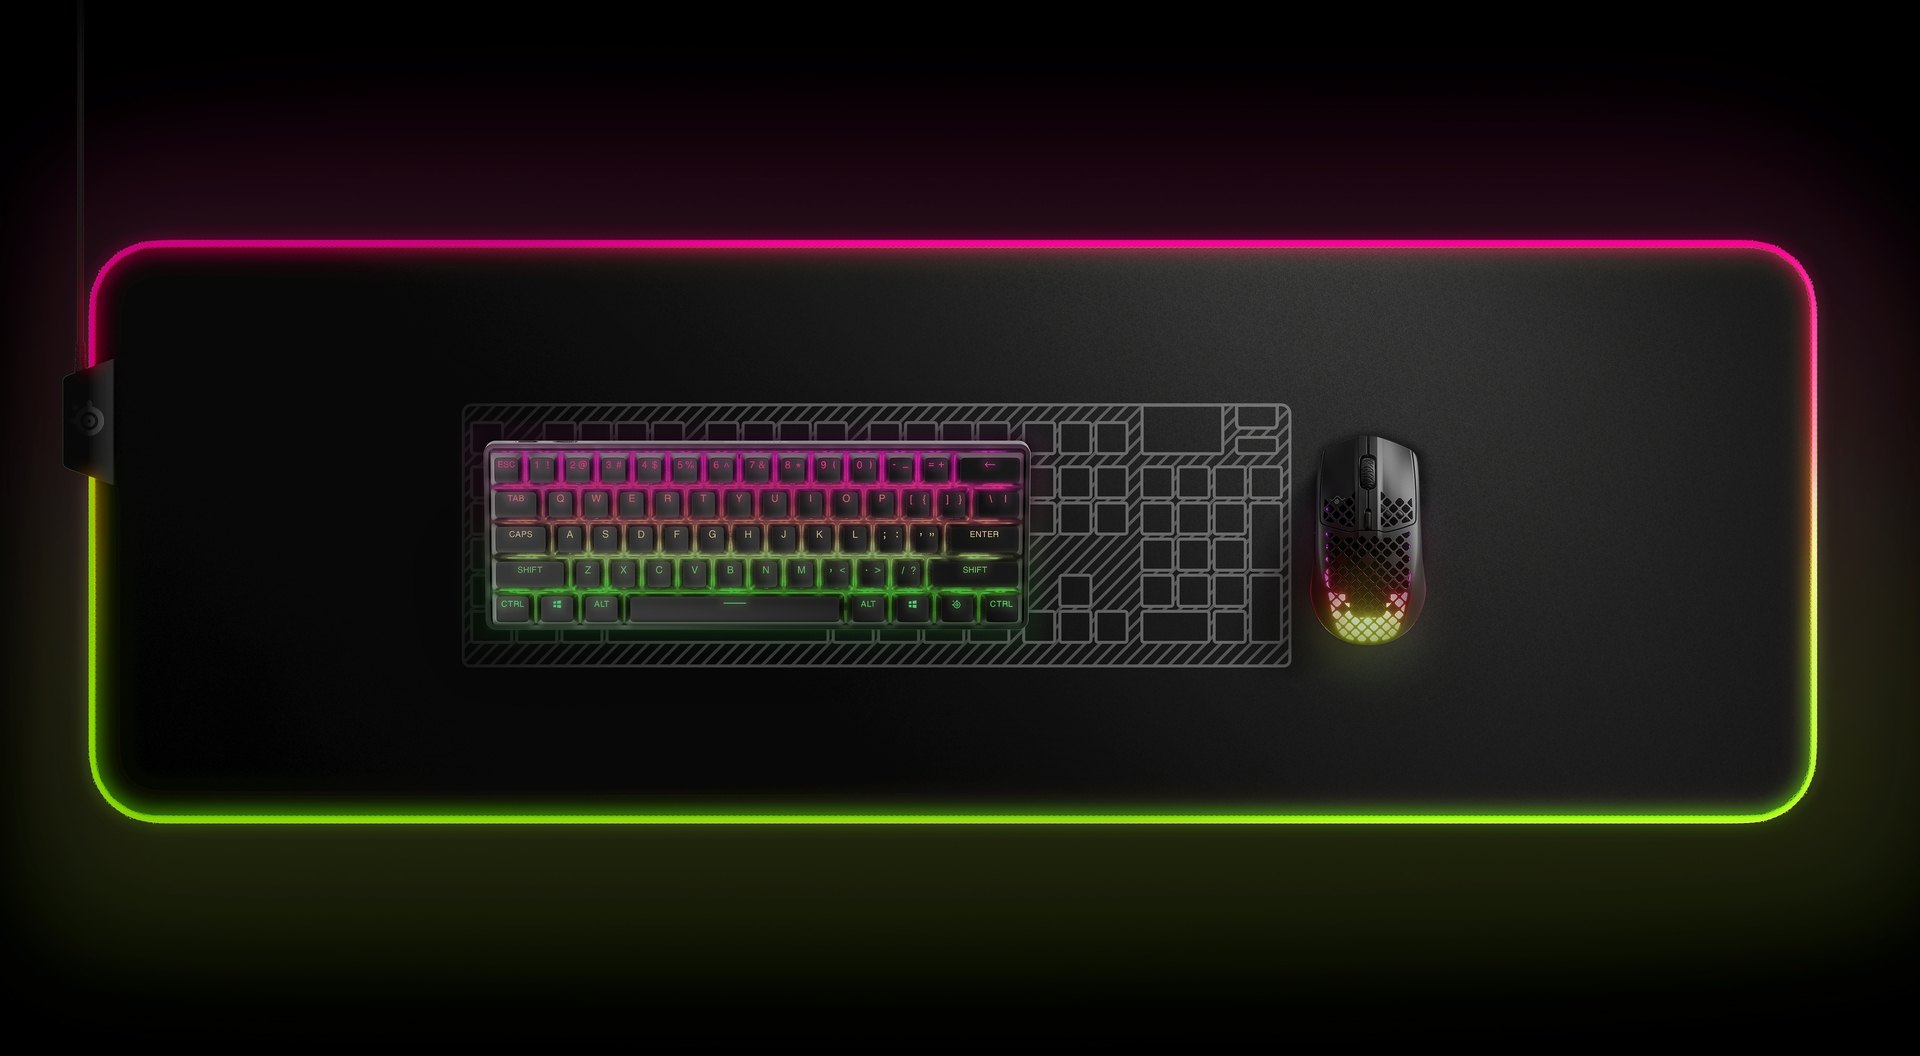 apex pro mini imgbuy 2.png  1920x1080 q100 crop fit optimize subsampling 2 SteelSeries Keyboards Are The ‘Fastest In The World’